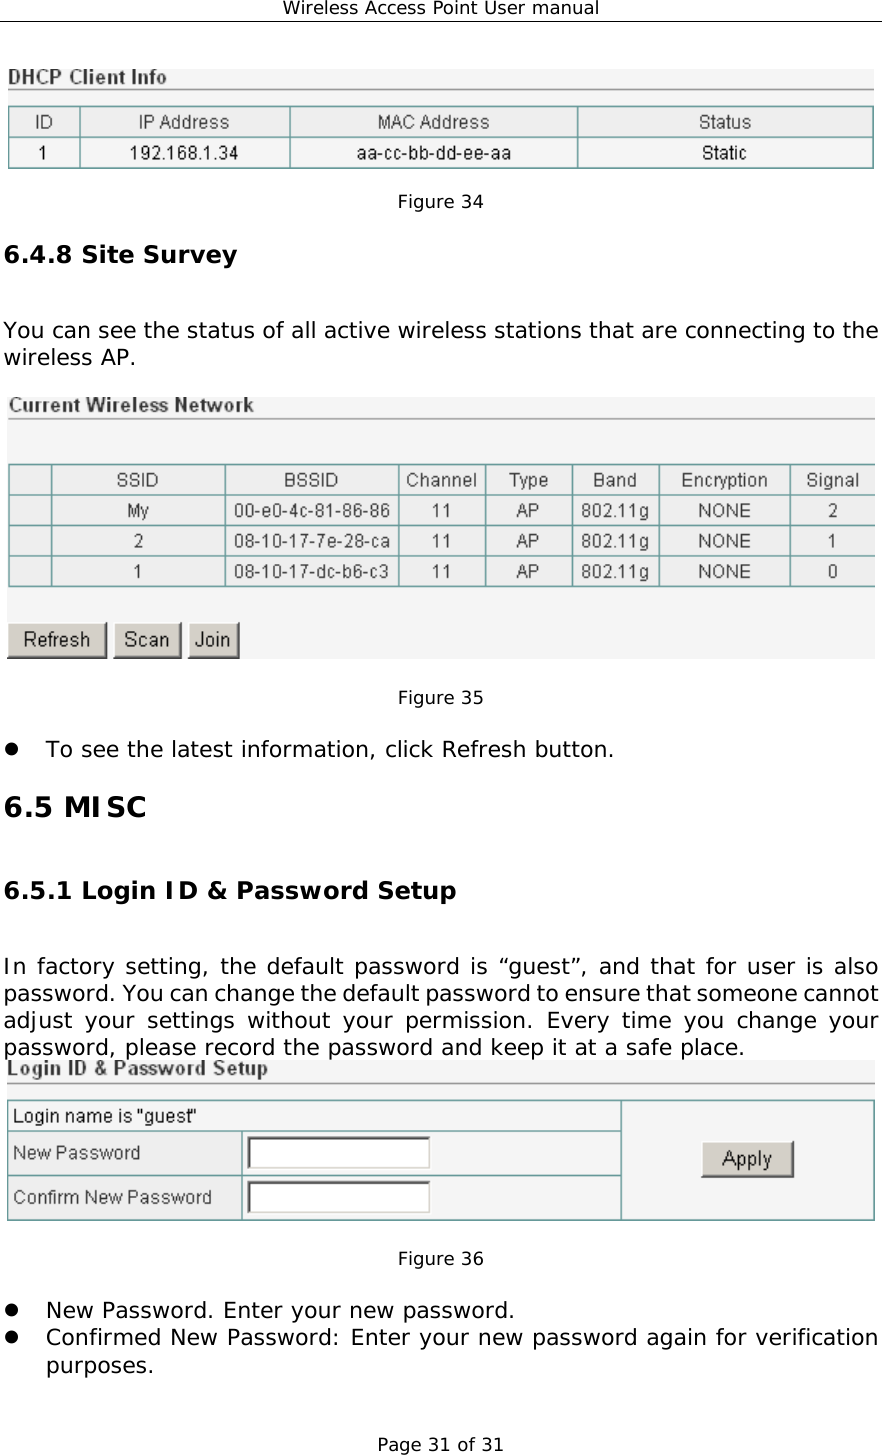 Wireless Access Point User manual Page 31 of 31    Figure 34 6.4.8 Site Survey You can see the status of all active wireless stations that are connecting to the wireless AP.     Figure 35    To see the latest information, click Refresh button. 6.5 MISC 6.5.1 Login ID &amp; Password Setup In factory setting, the default password is “guest”, and that for user is also password. You can change the default password to ensure that someone cannot adjust your settings without your permission. Every time you change your password, please record the password and keep it at a safe place.    Figure 36    New Password. Enter your new password.   Confirmed New Password: Enter your new password again for verification purposes. 